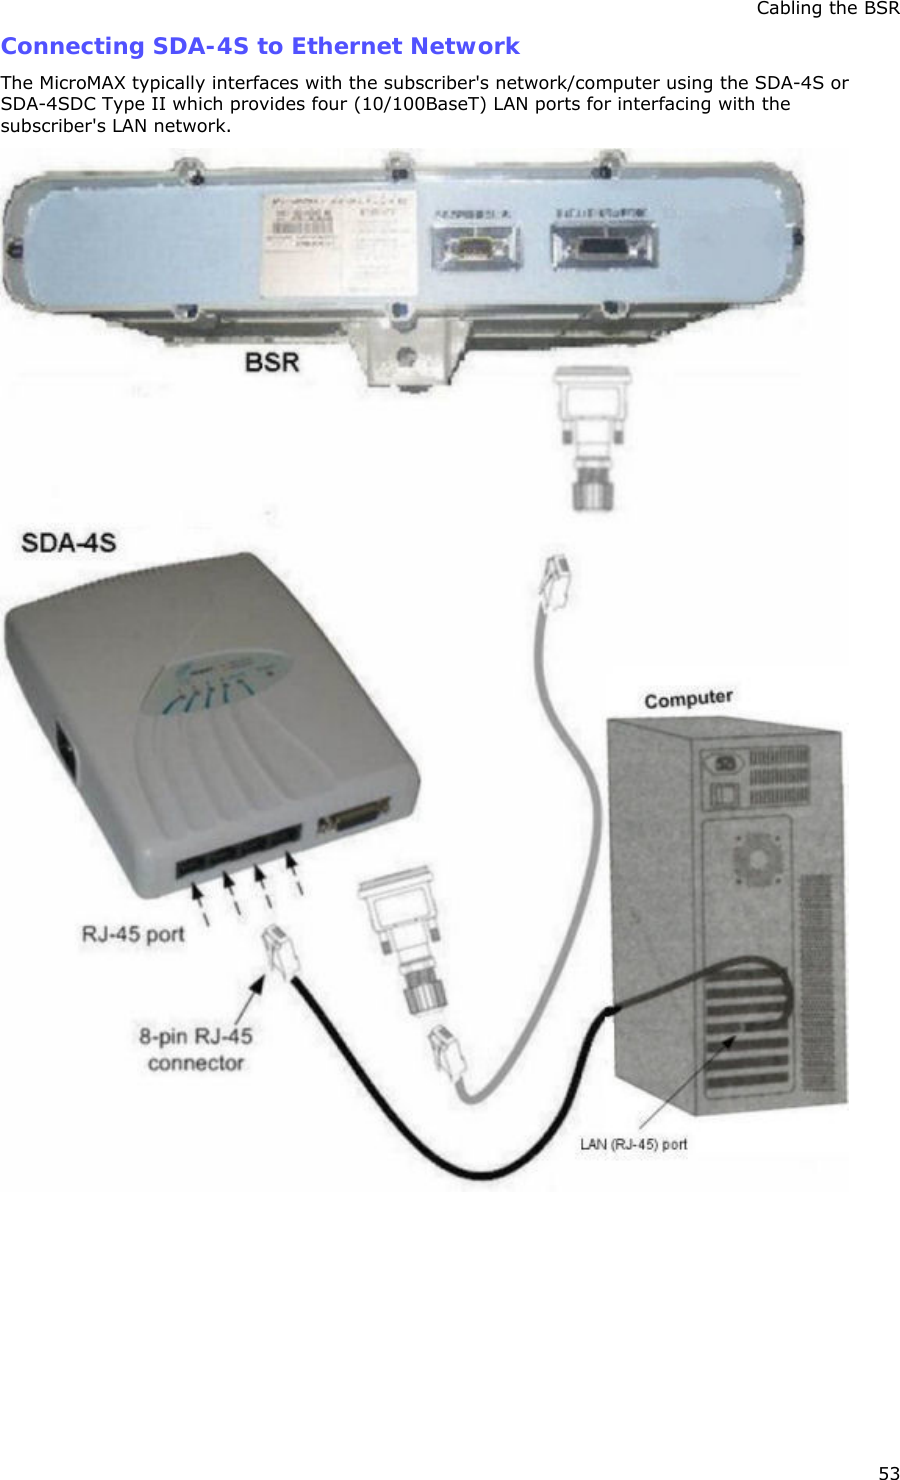 Cabling the BSR 53 Connecting SDA-4S to Ethernet Network The MicroMAX typically interfaces with the subscriber&apos;s network/computer using the SDA-4S or SDA-4SDC Type II which provides four (10/100BaseT) LAN ports for interfacing with the subscriber&apos;s LAN network.  